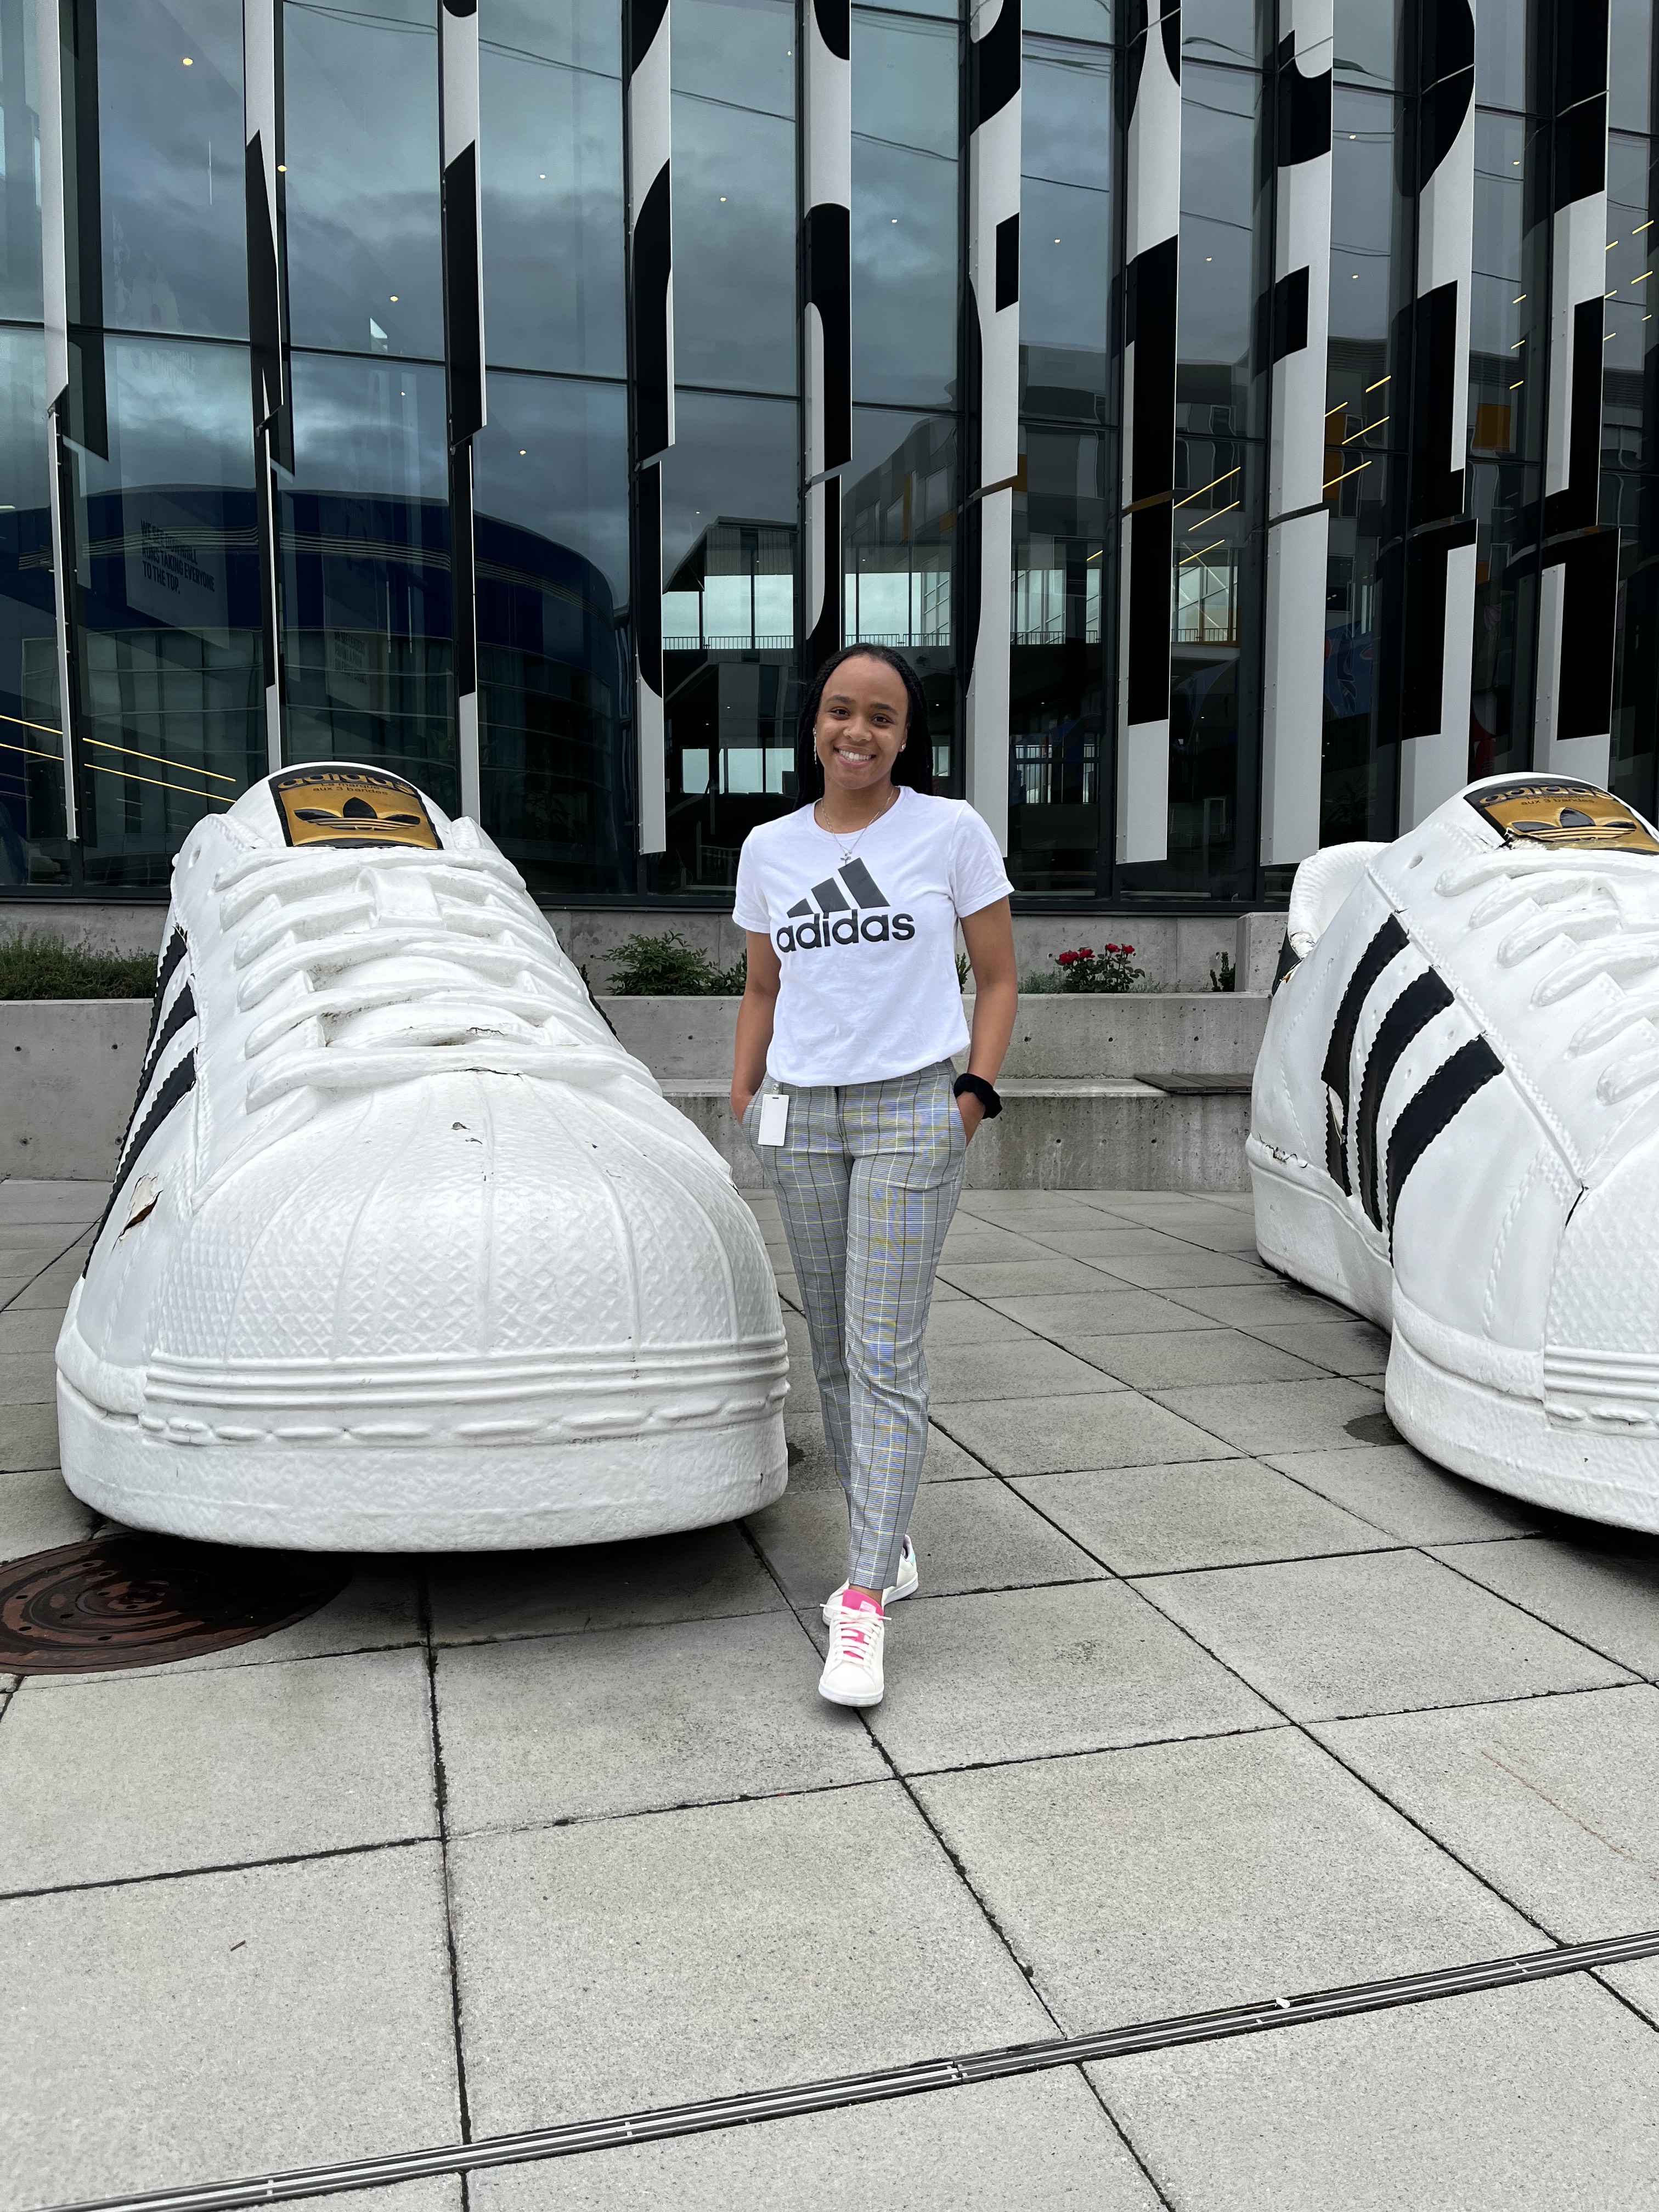 Kent State College of Communication Information on Twitter: "As an intern with @adidas in Portland, this summer, Public Relations student Kristyn Hibbett, '22, has further learned the importance of storytelling and